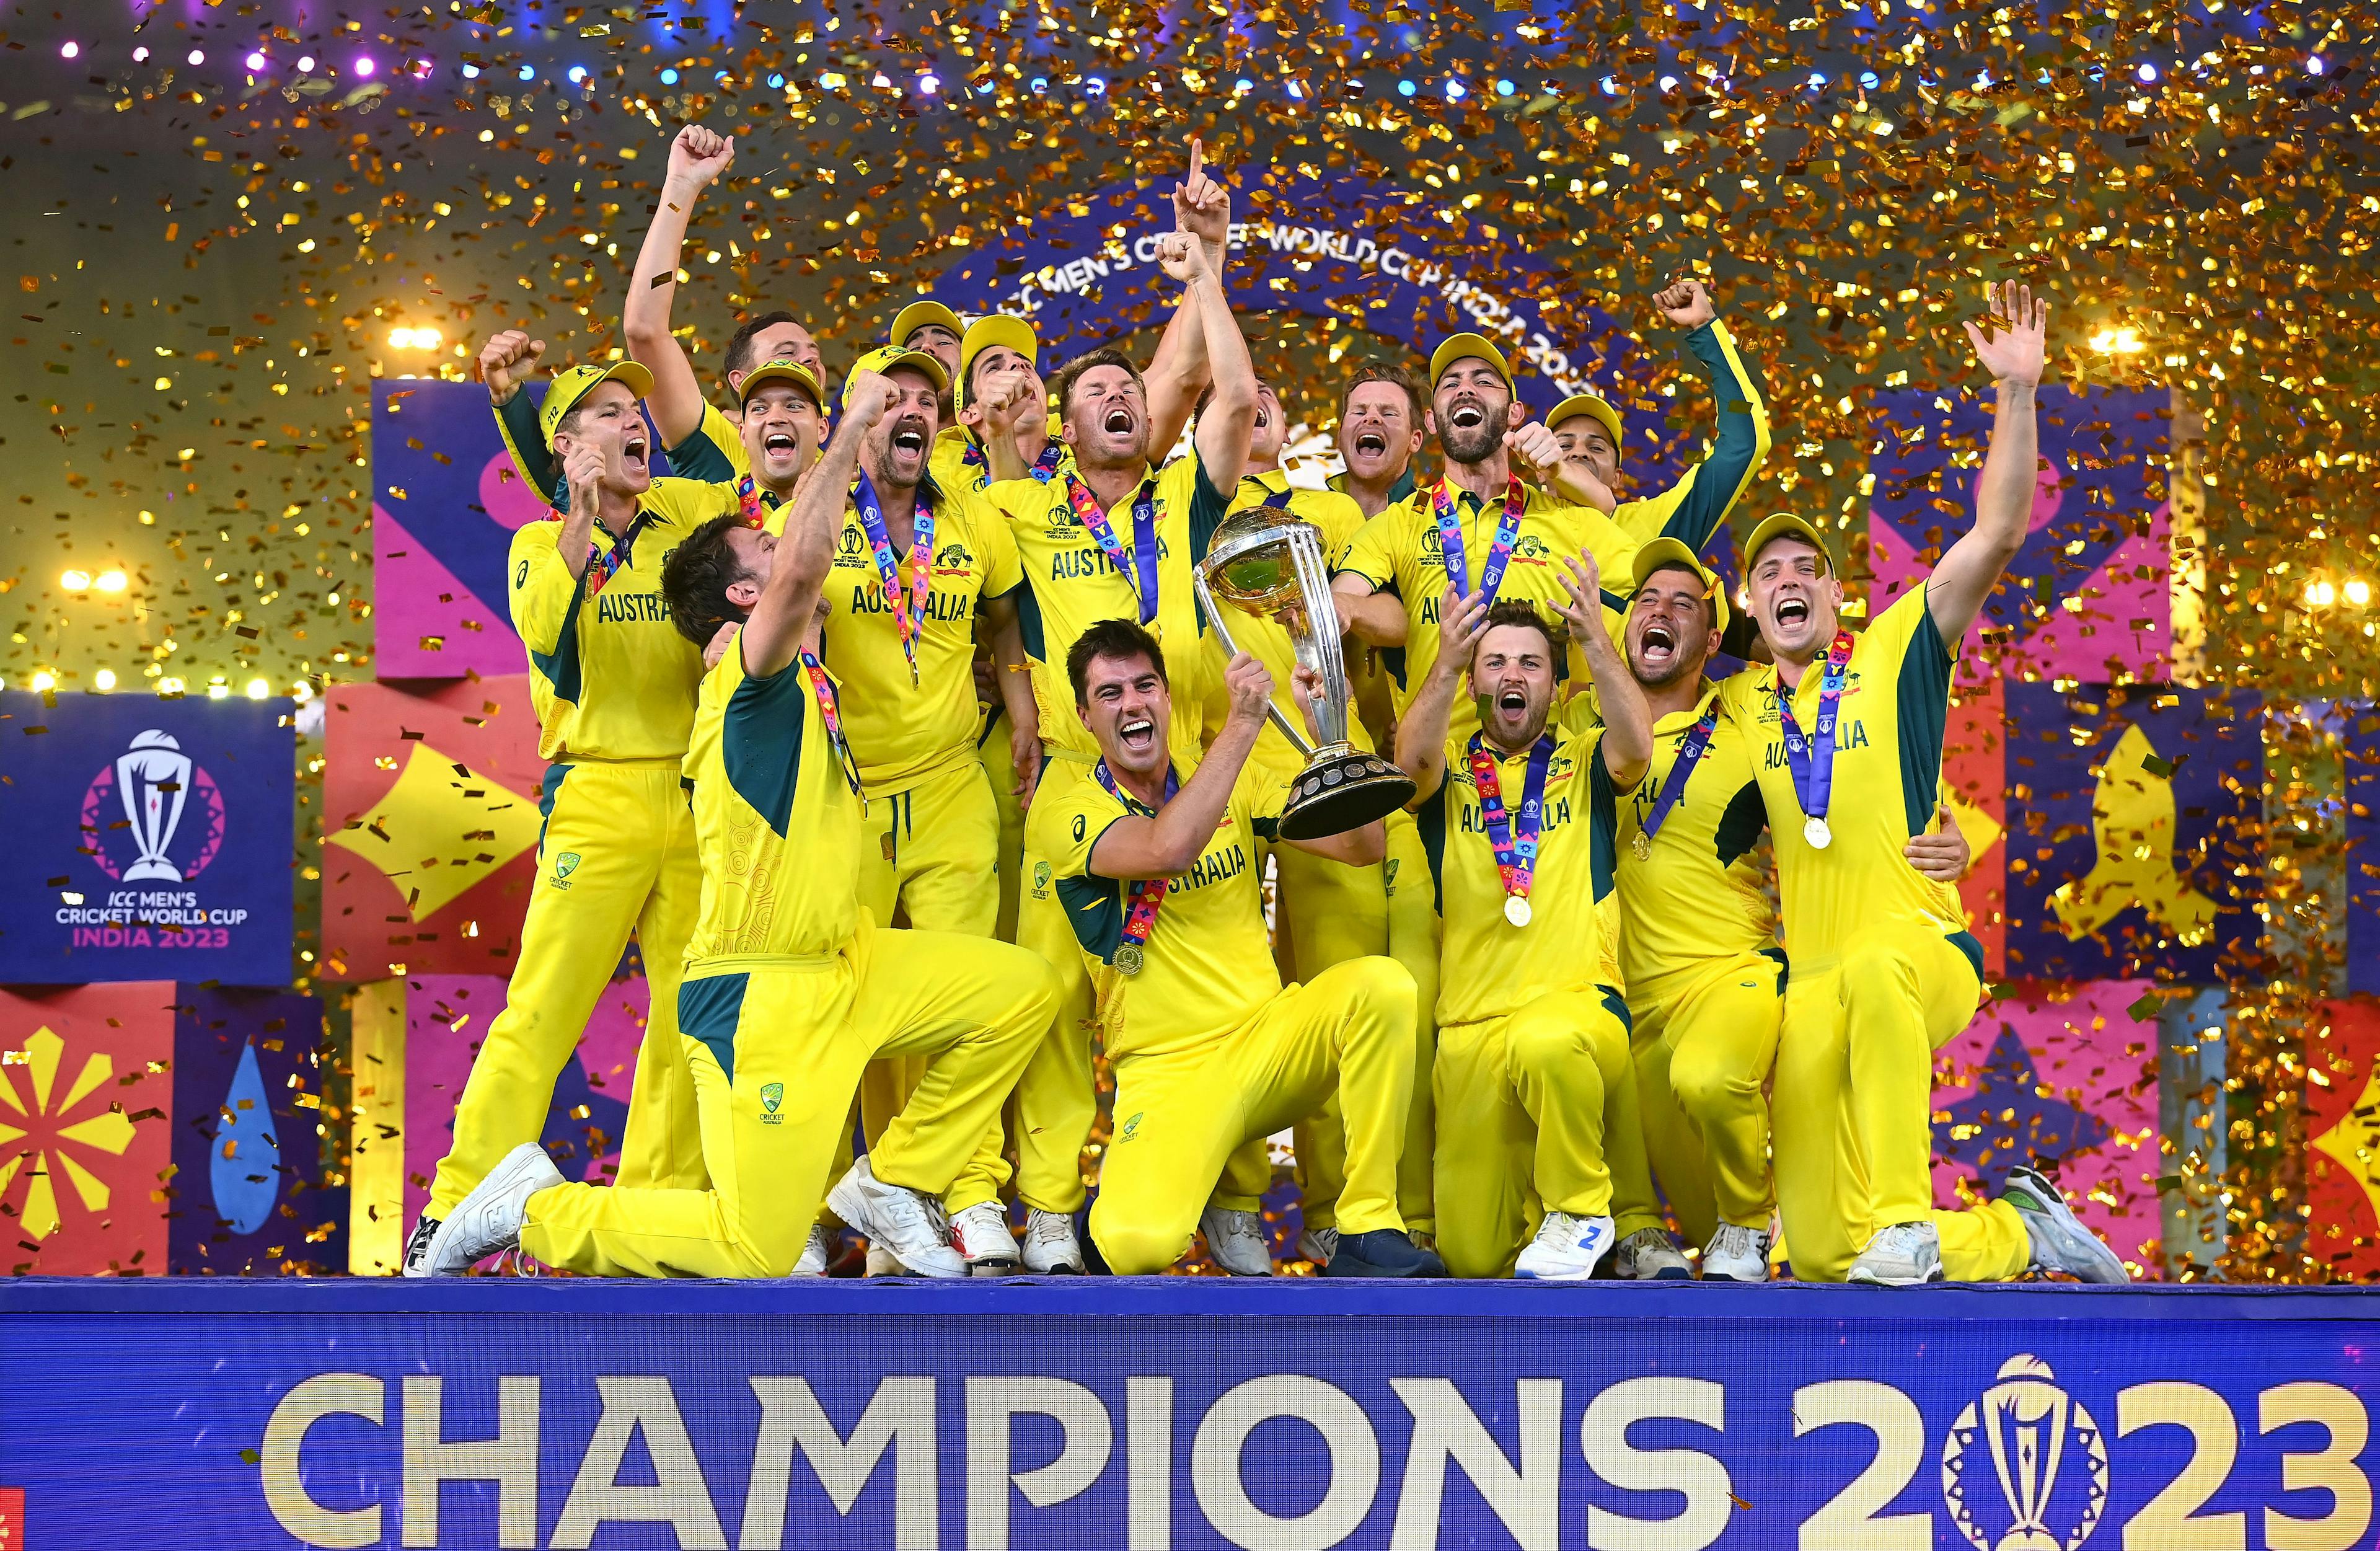 The Most World Cup Winning Cricket Team